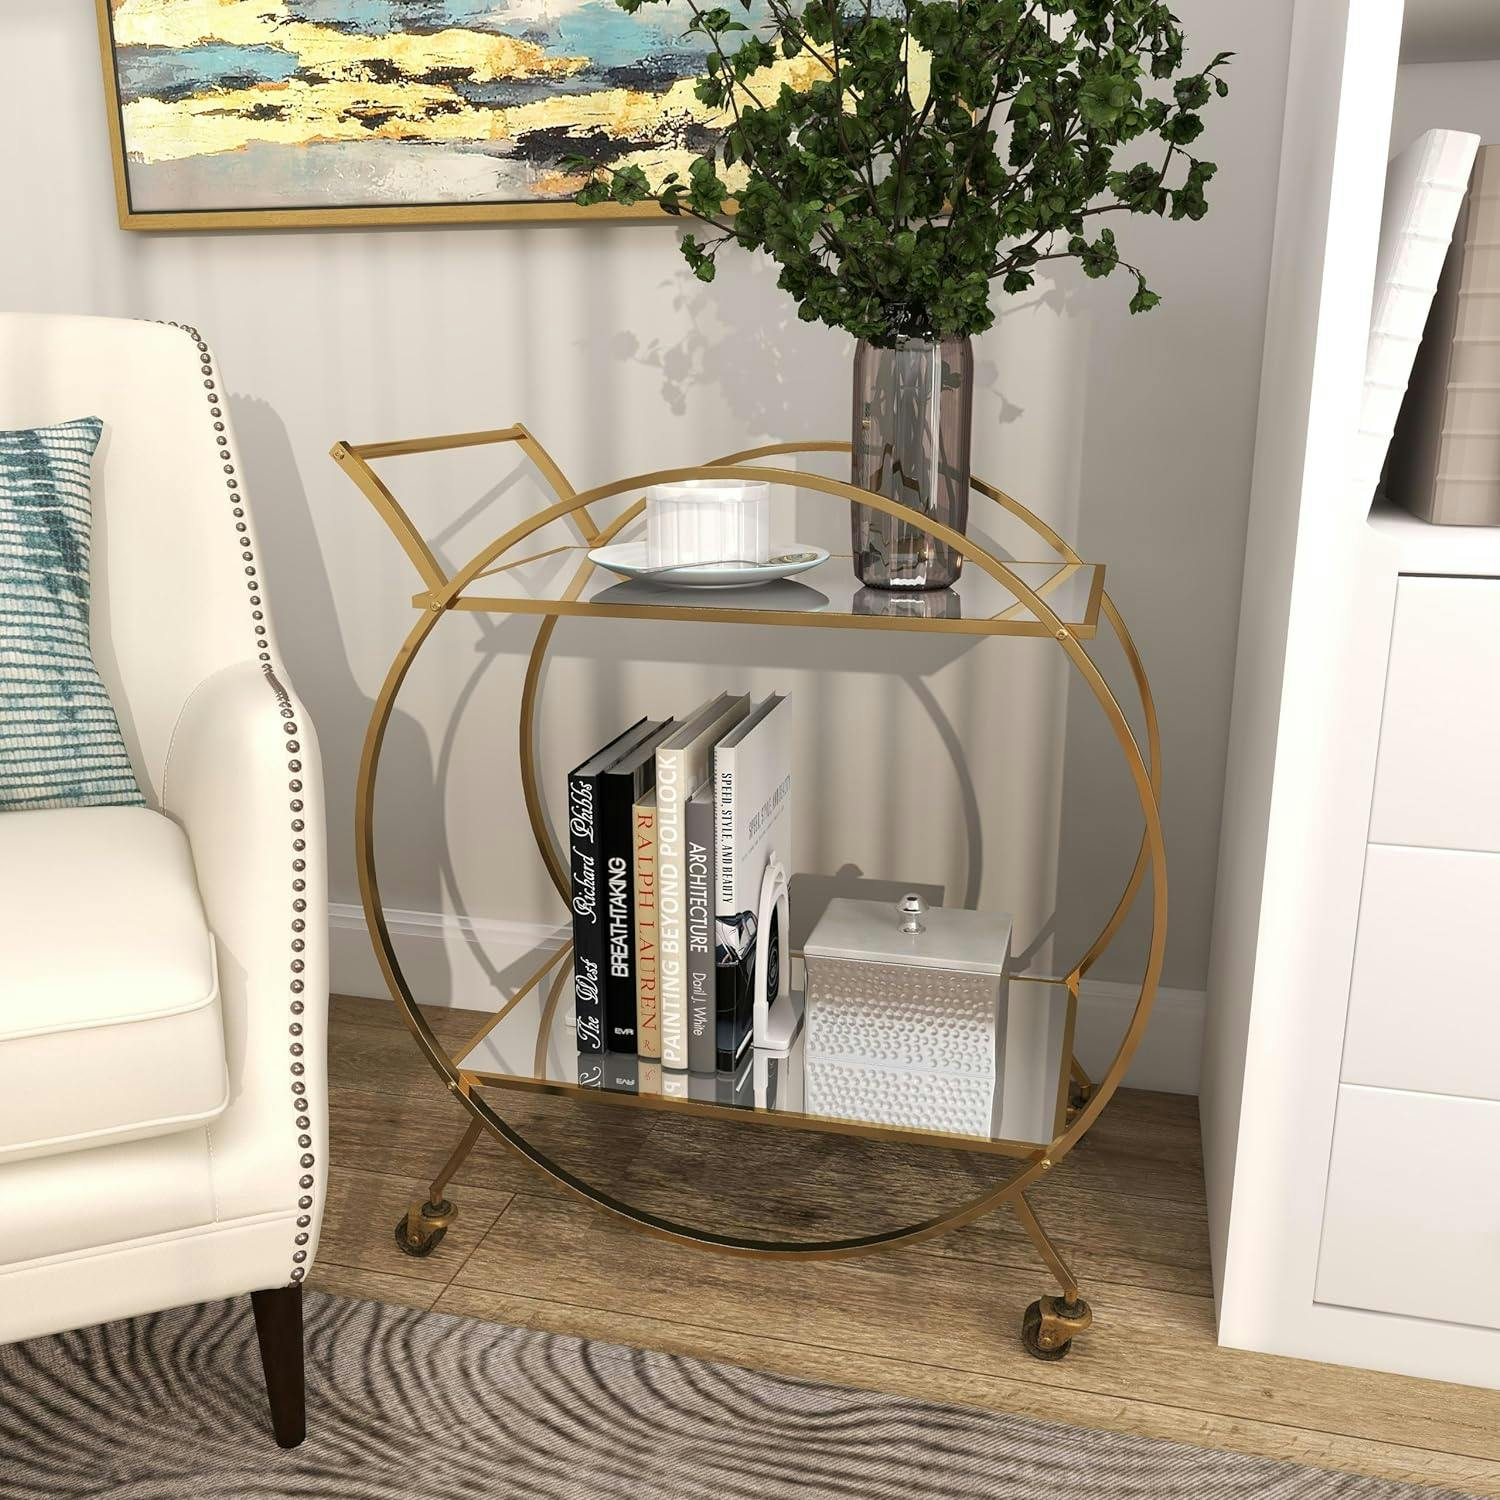 Elegant Gold Metal Bar Cart with Mirrored Shelves and Wheels